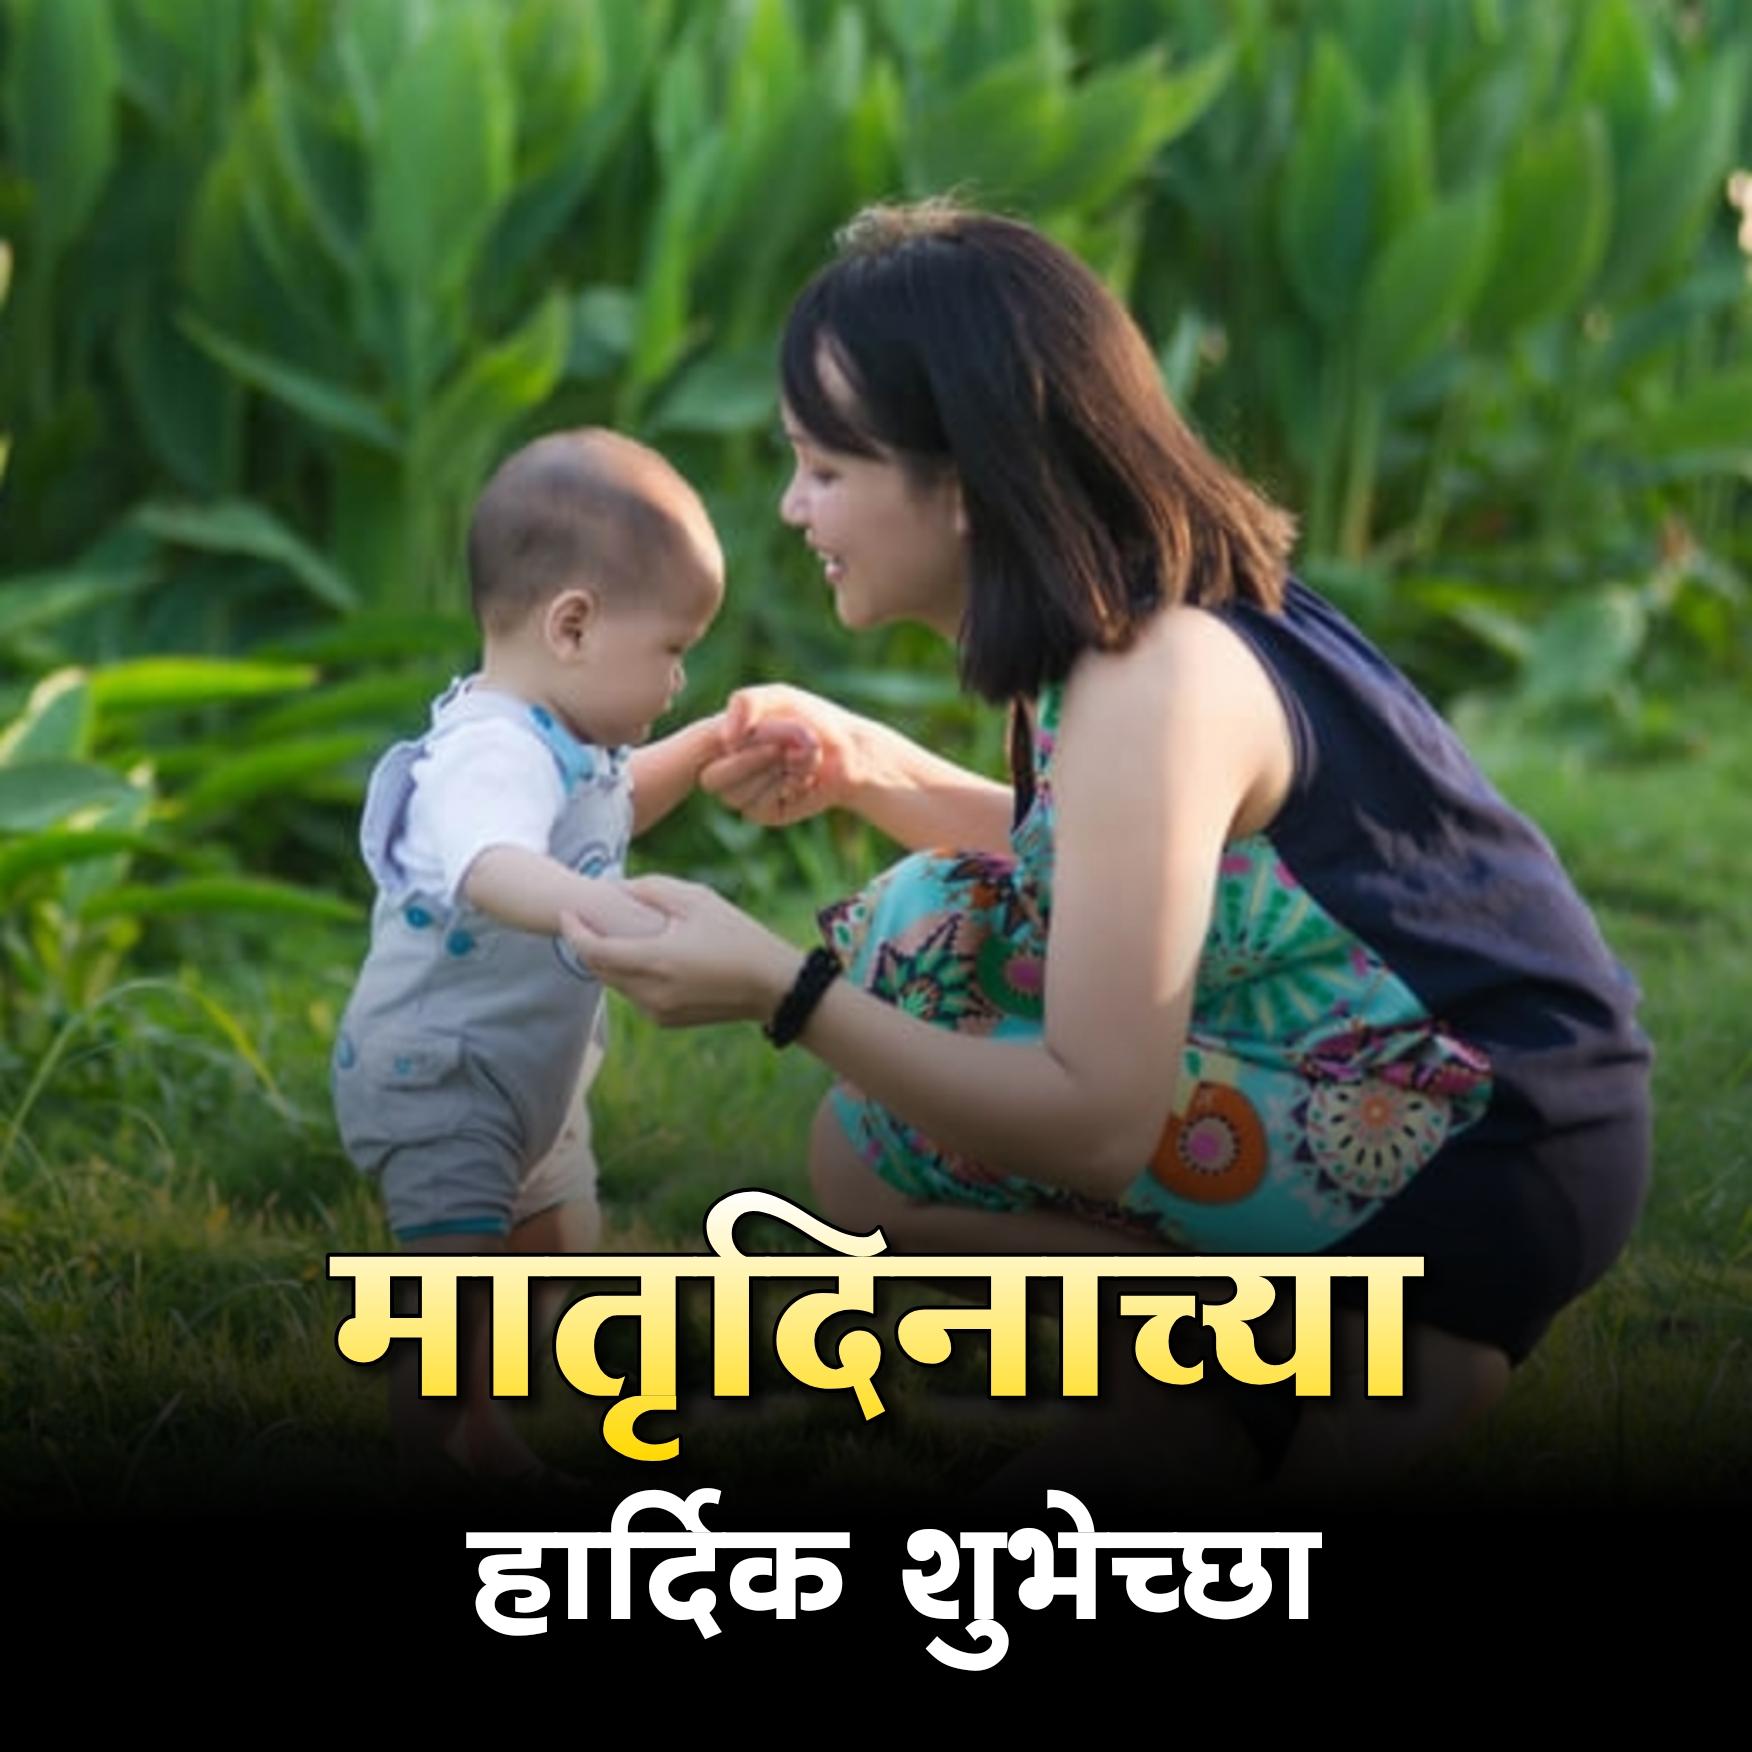 Happy Mother's Day Images in Marathi Download